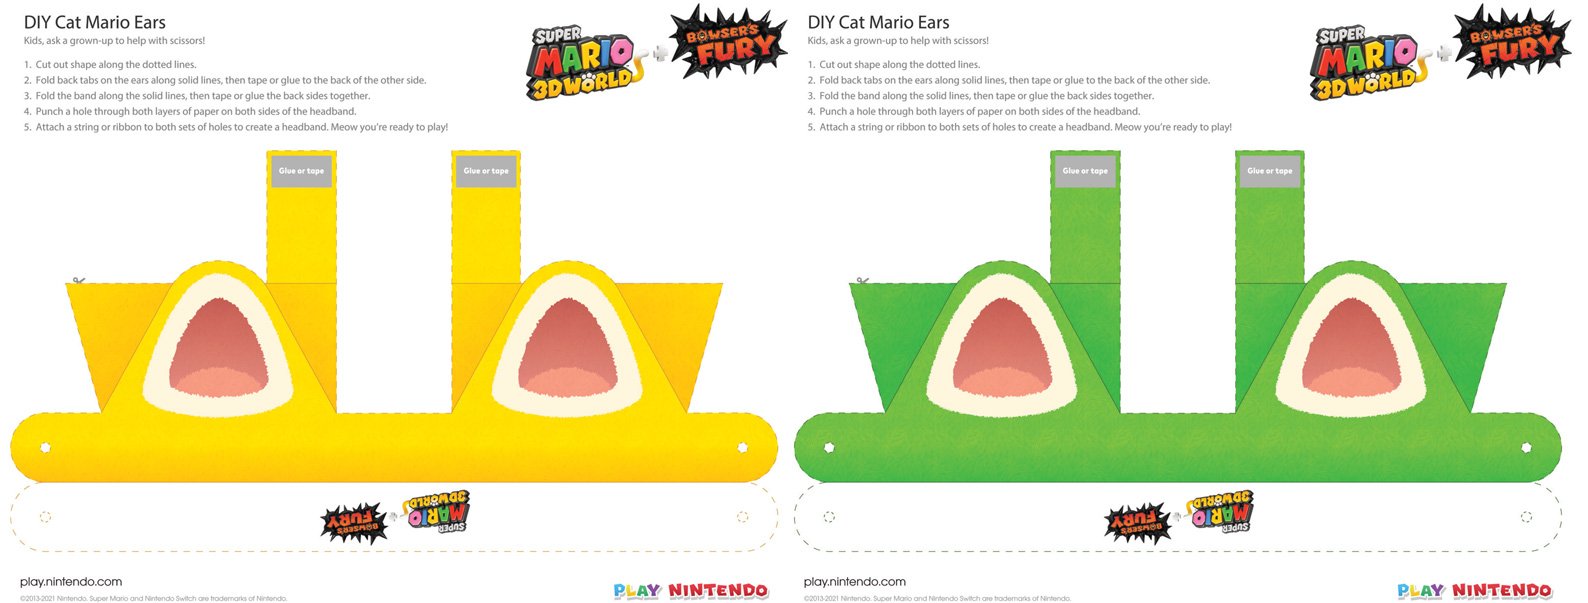 Super Mario - It's the purrfect project for Super Mario 3D World fans! Just  download, print, and fold to create your own Cat Mario ears. The game is  available now!